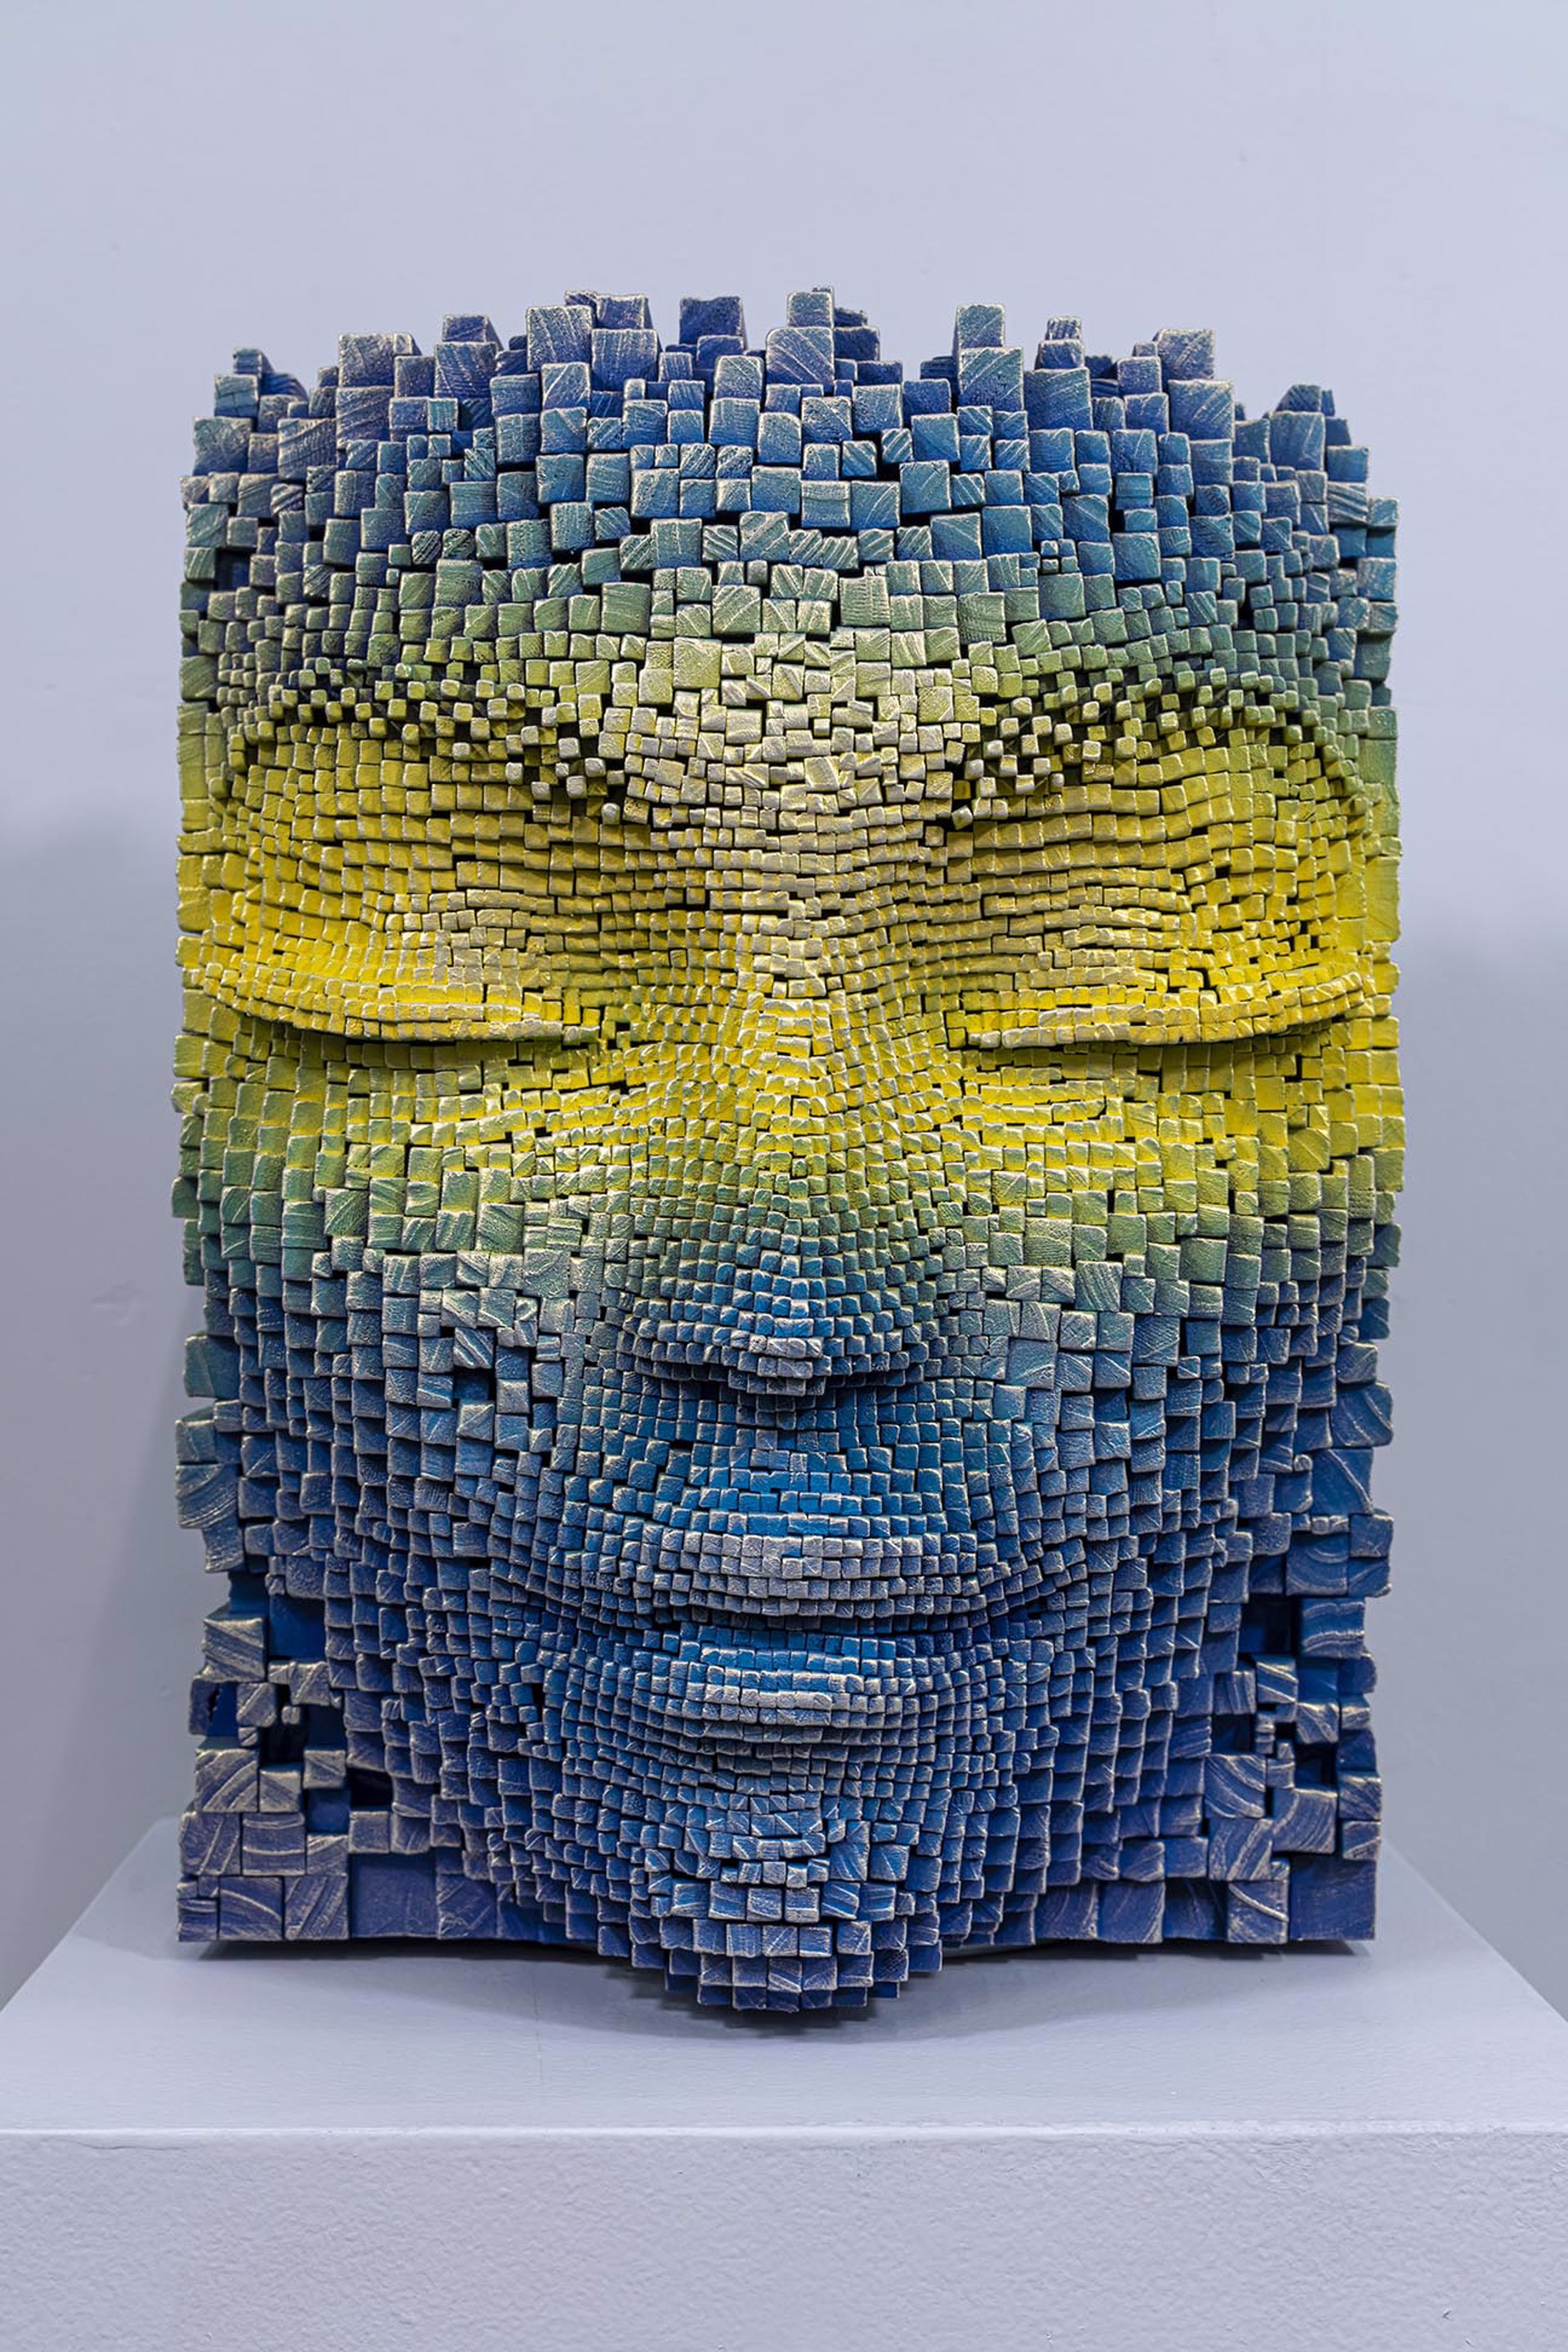 Feeling the Light by Gil Bruvel